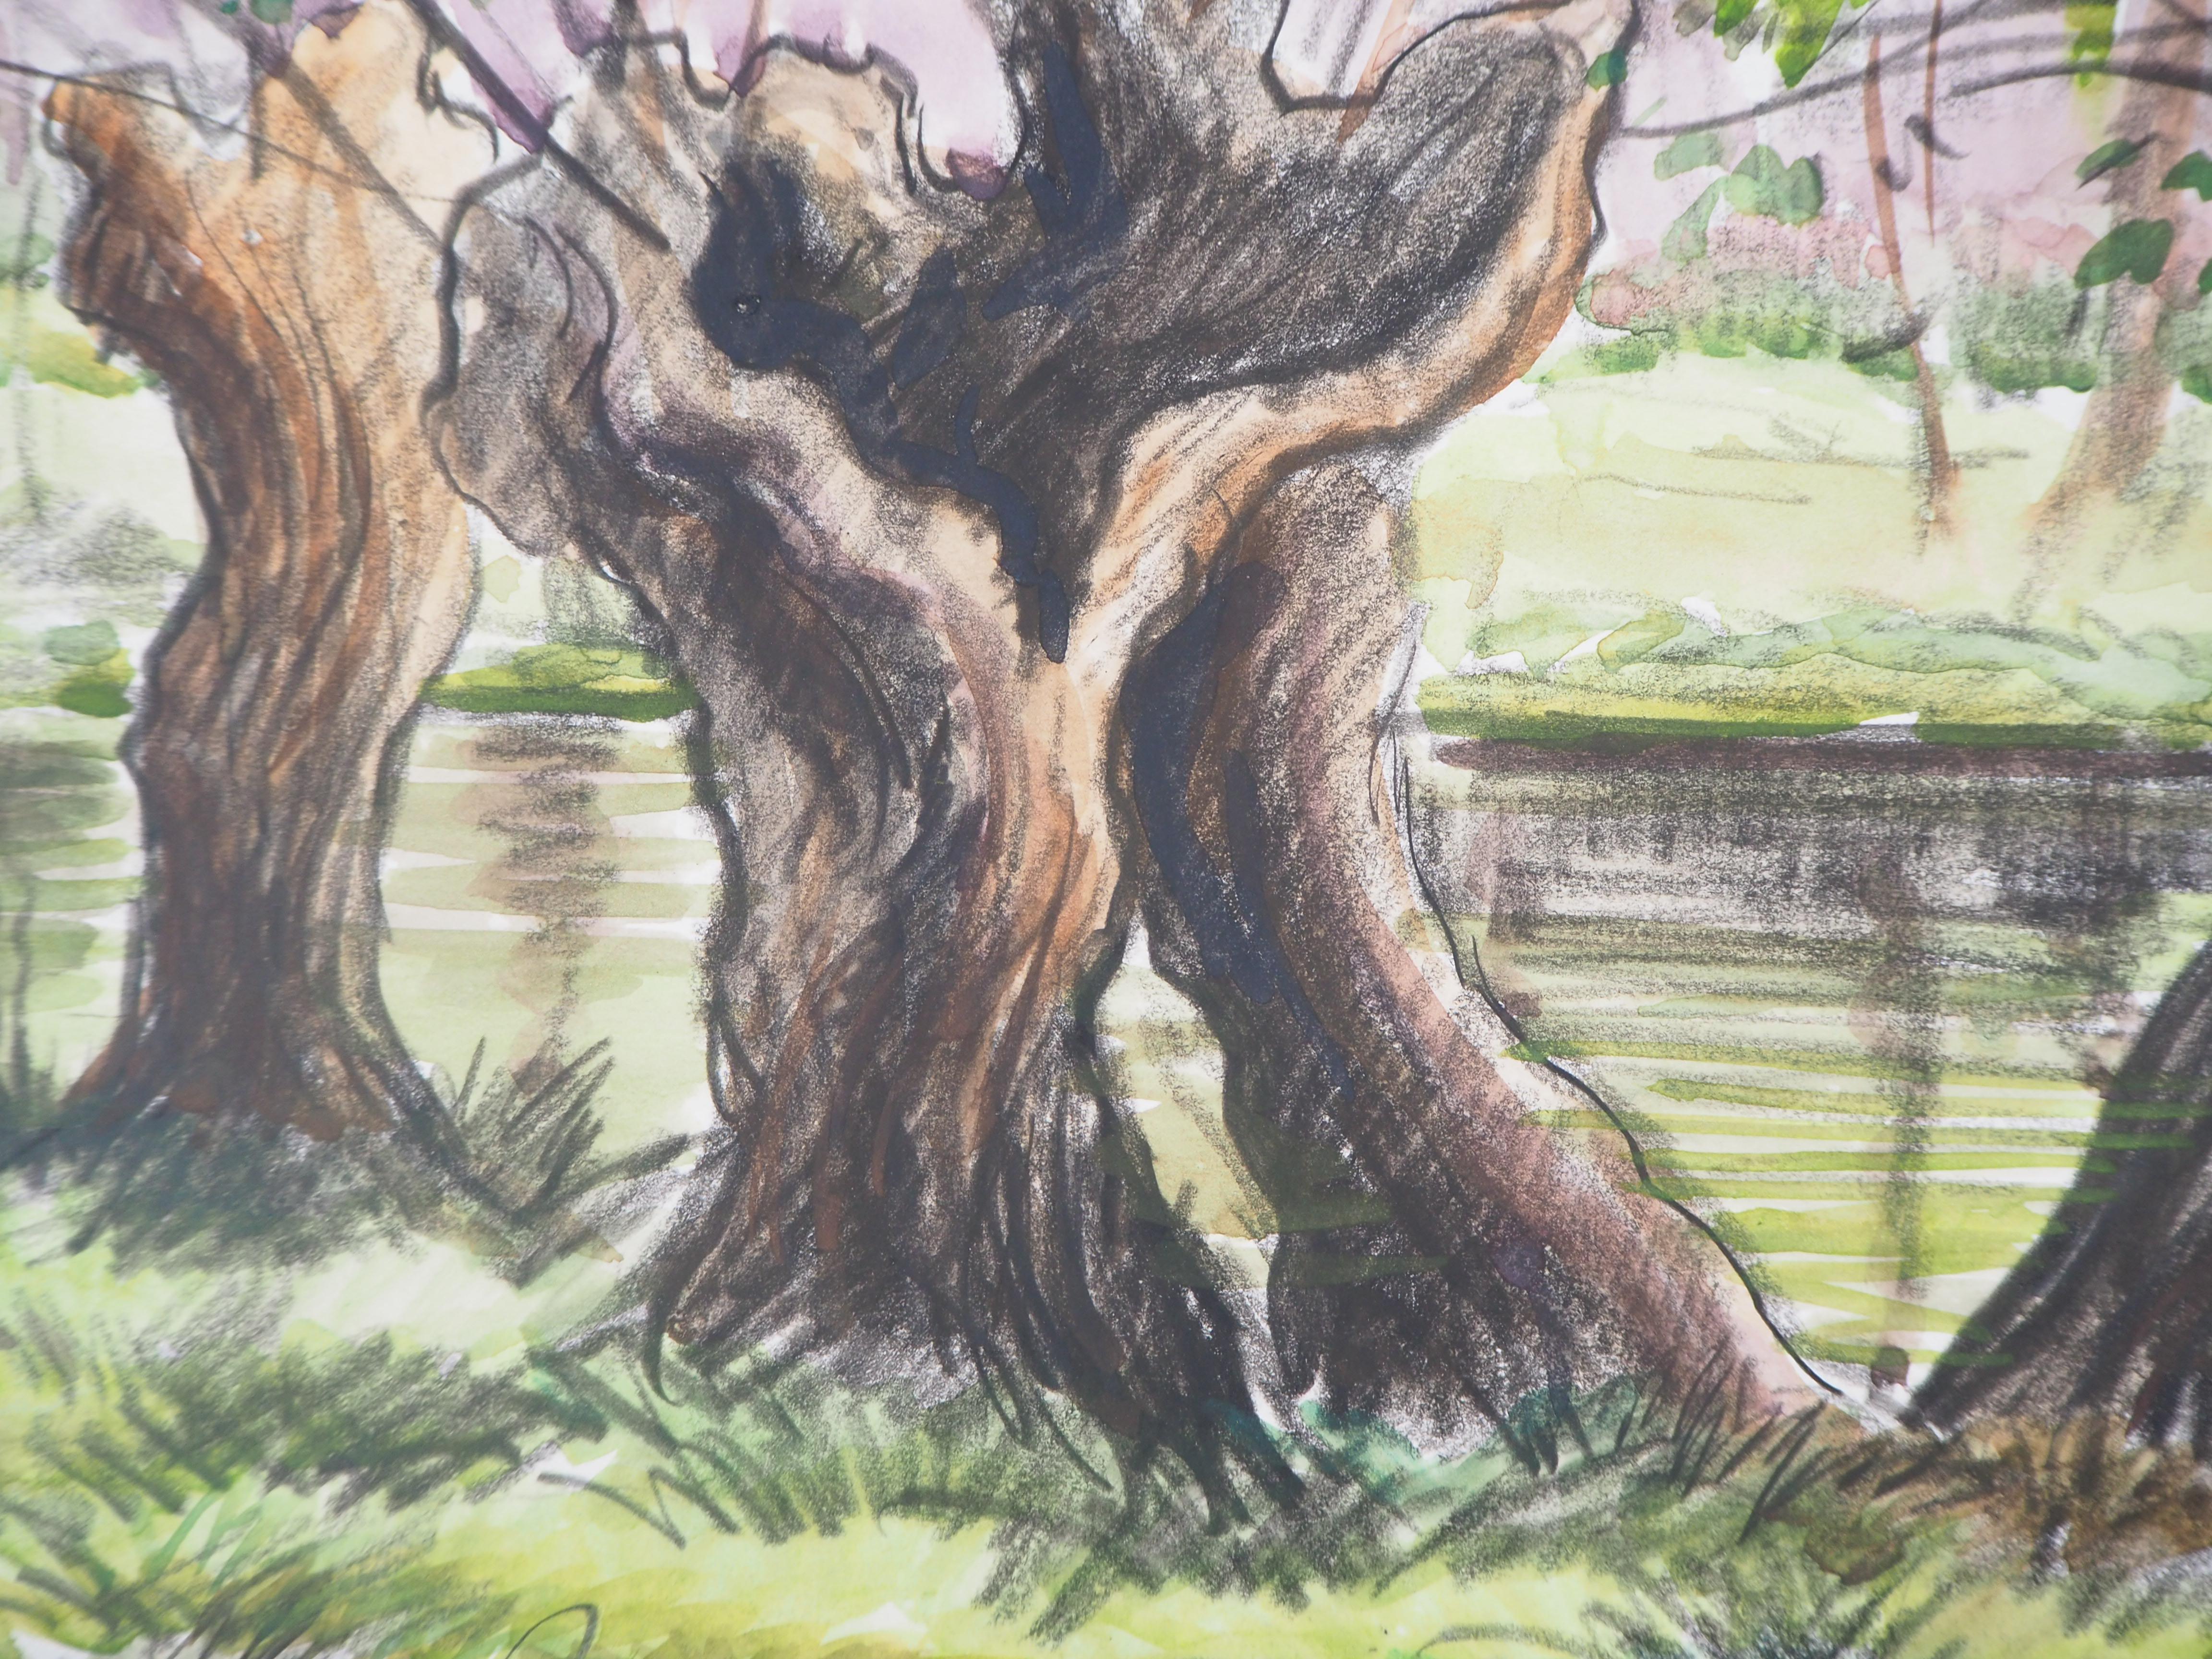 Paul Emile PISSARRO (1884-1972)
Old Trees near a Canal, c. 1940

Original watercolor and charcoals painting
Handsigned in the lower left corner
On vellum 25 x 32 cm (c. 10 x 13 in)

Very good condition